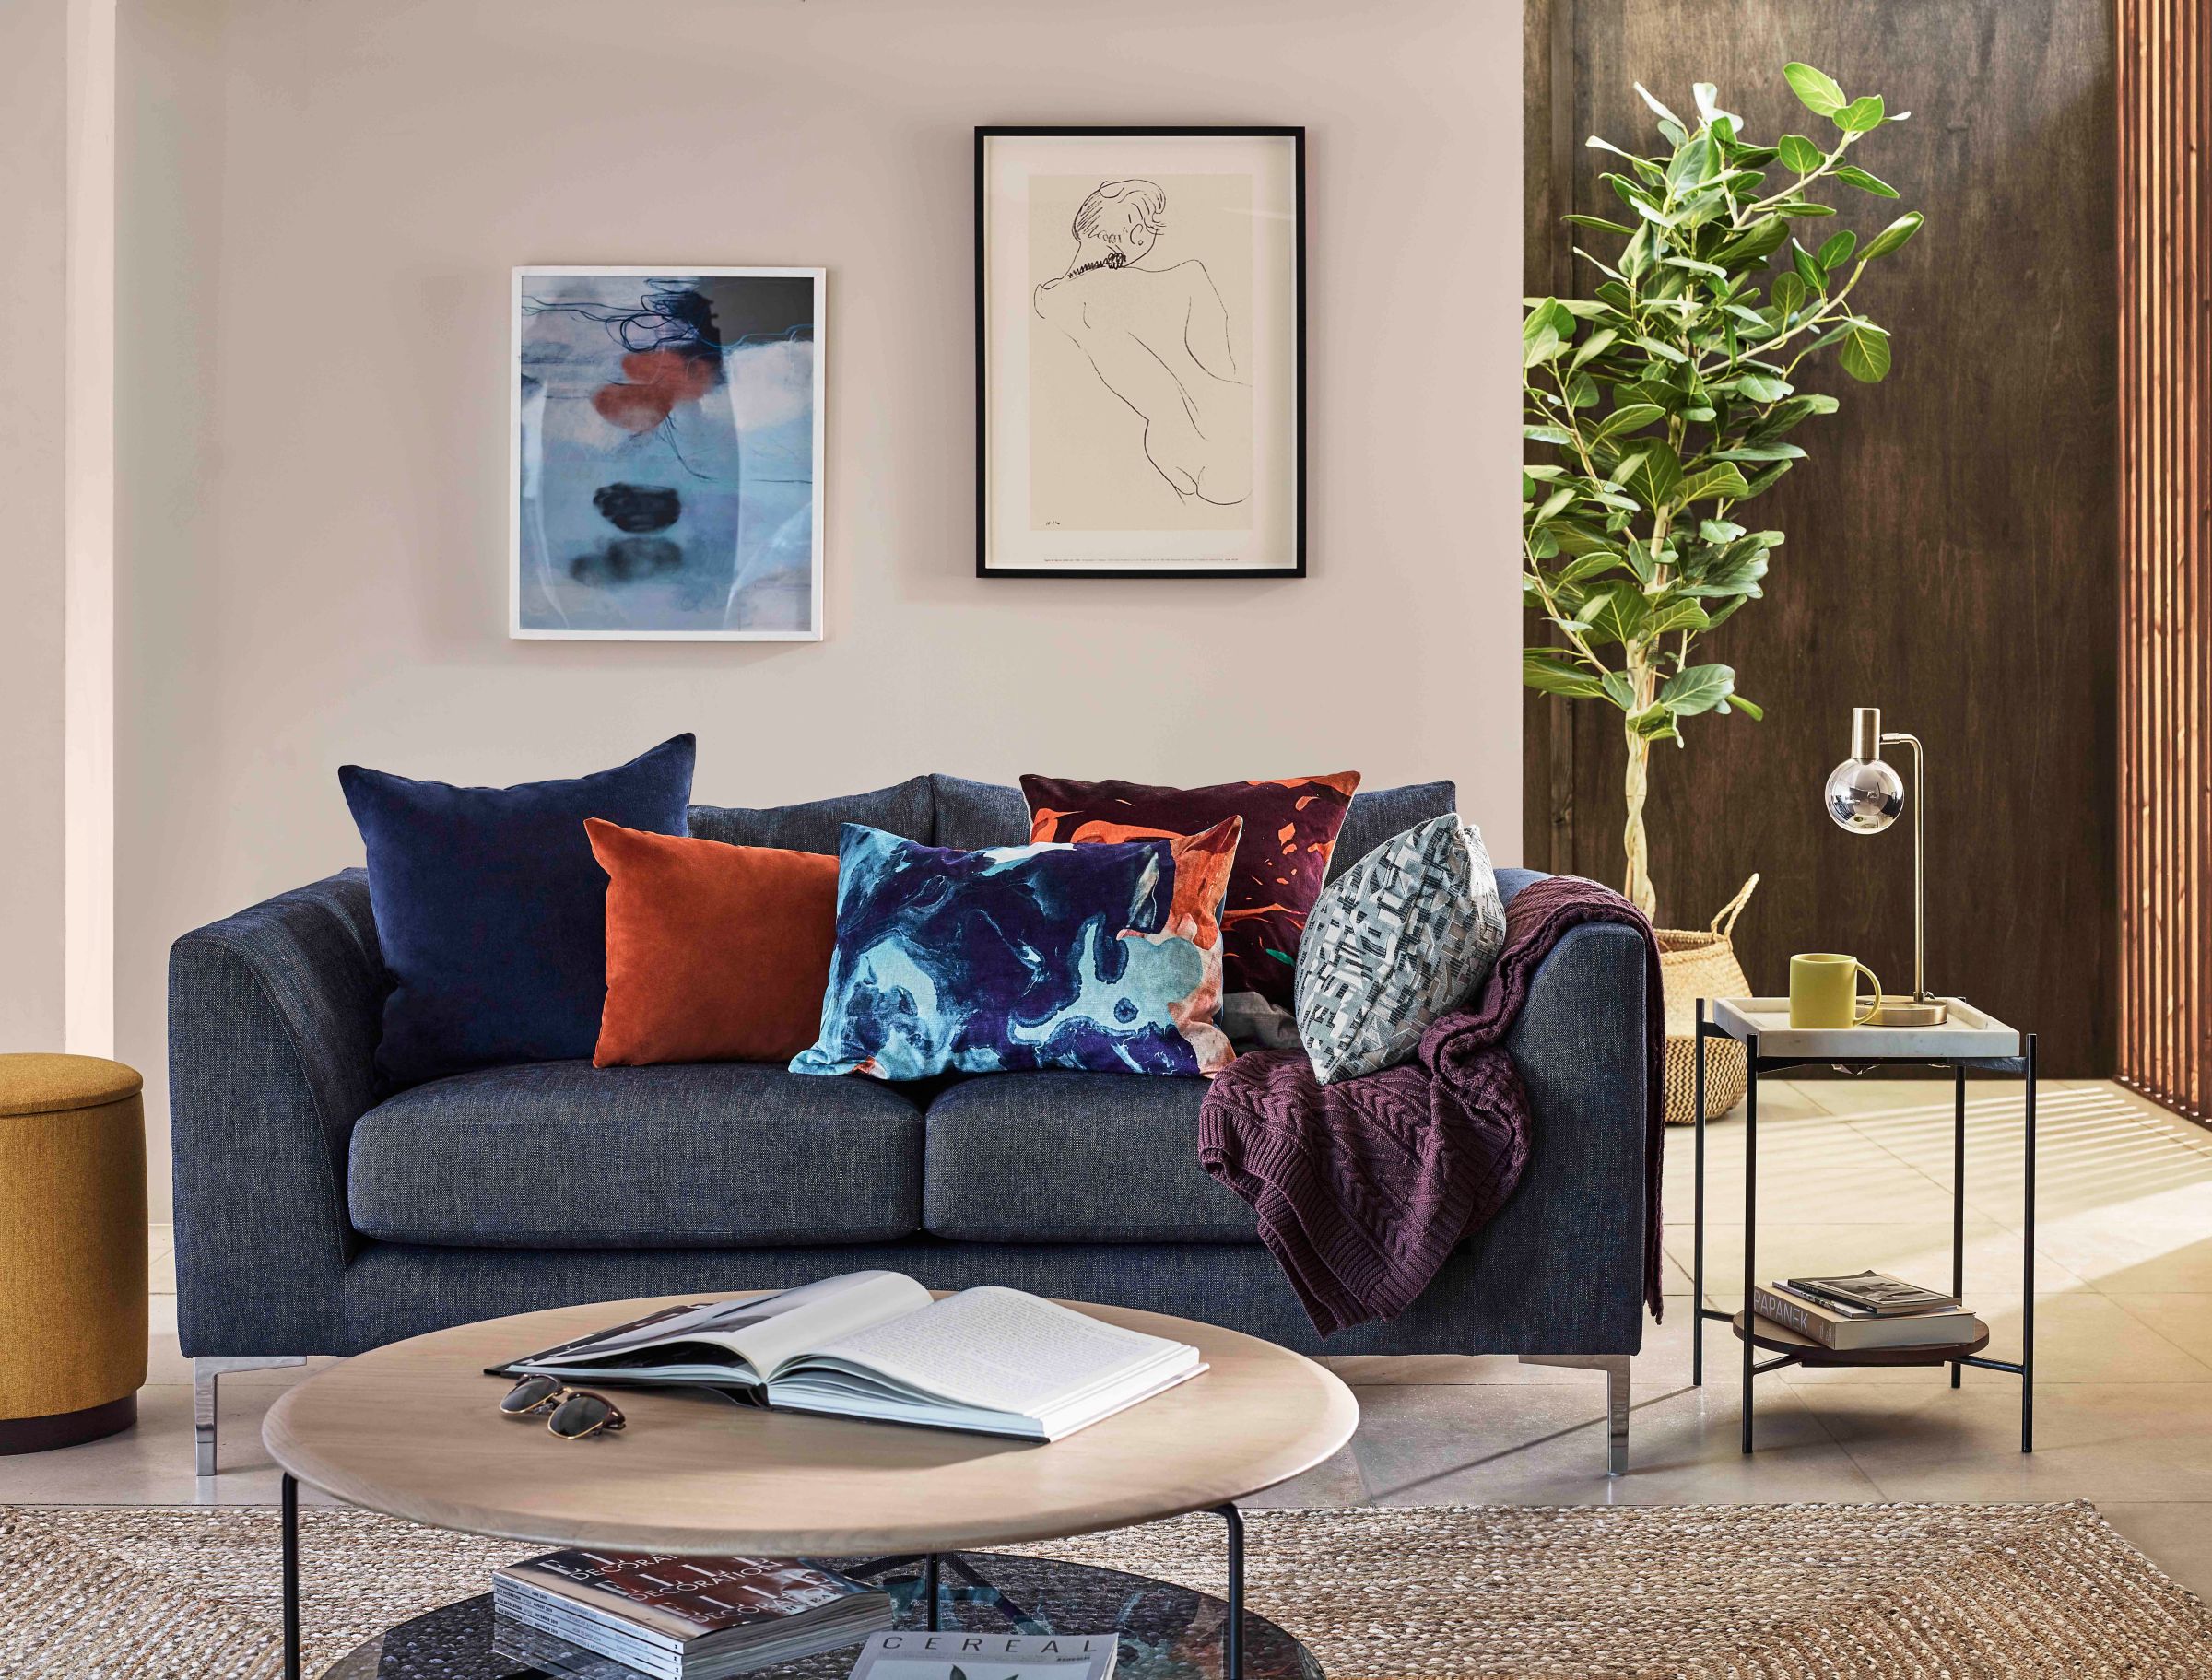 How To Dress A Sofa John Lewis Partners, How To Dress A Corner Sofa With Throws